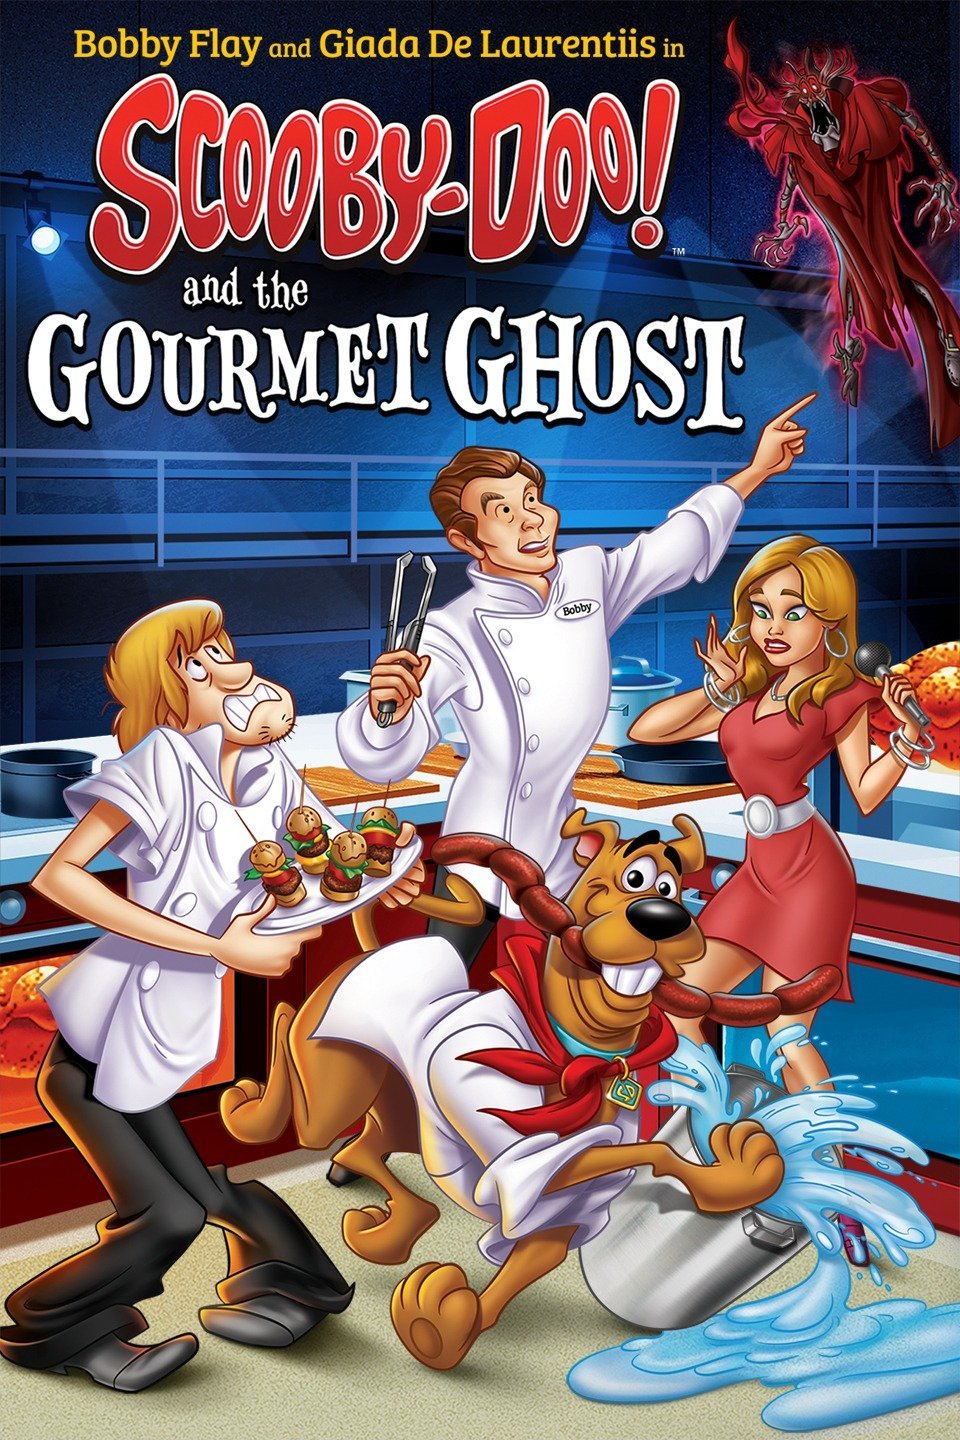 Poster of the movie Scooby-Doo! and the Gourmet Ghost